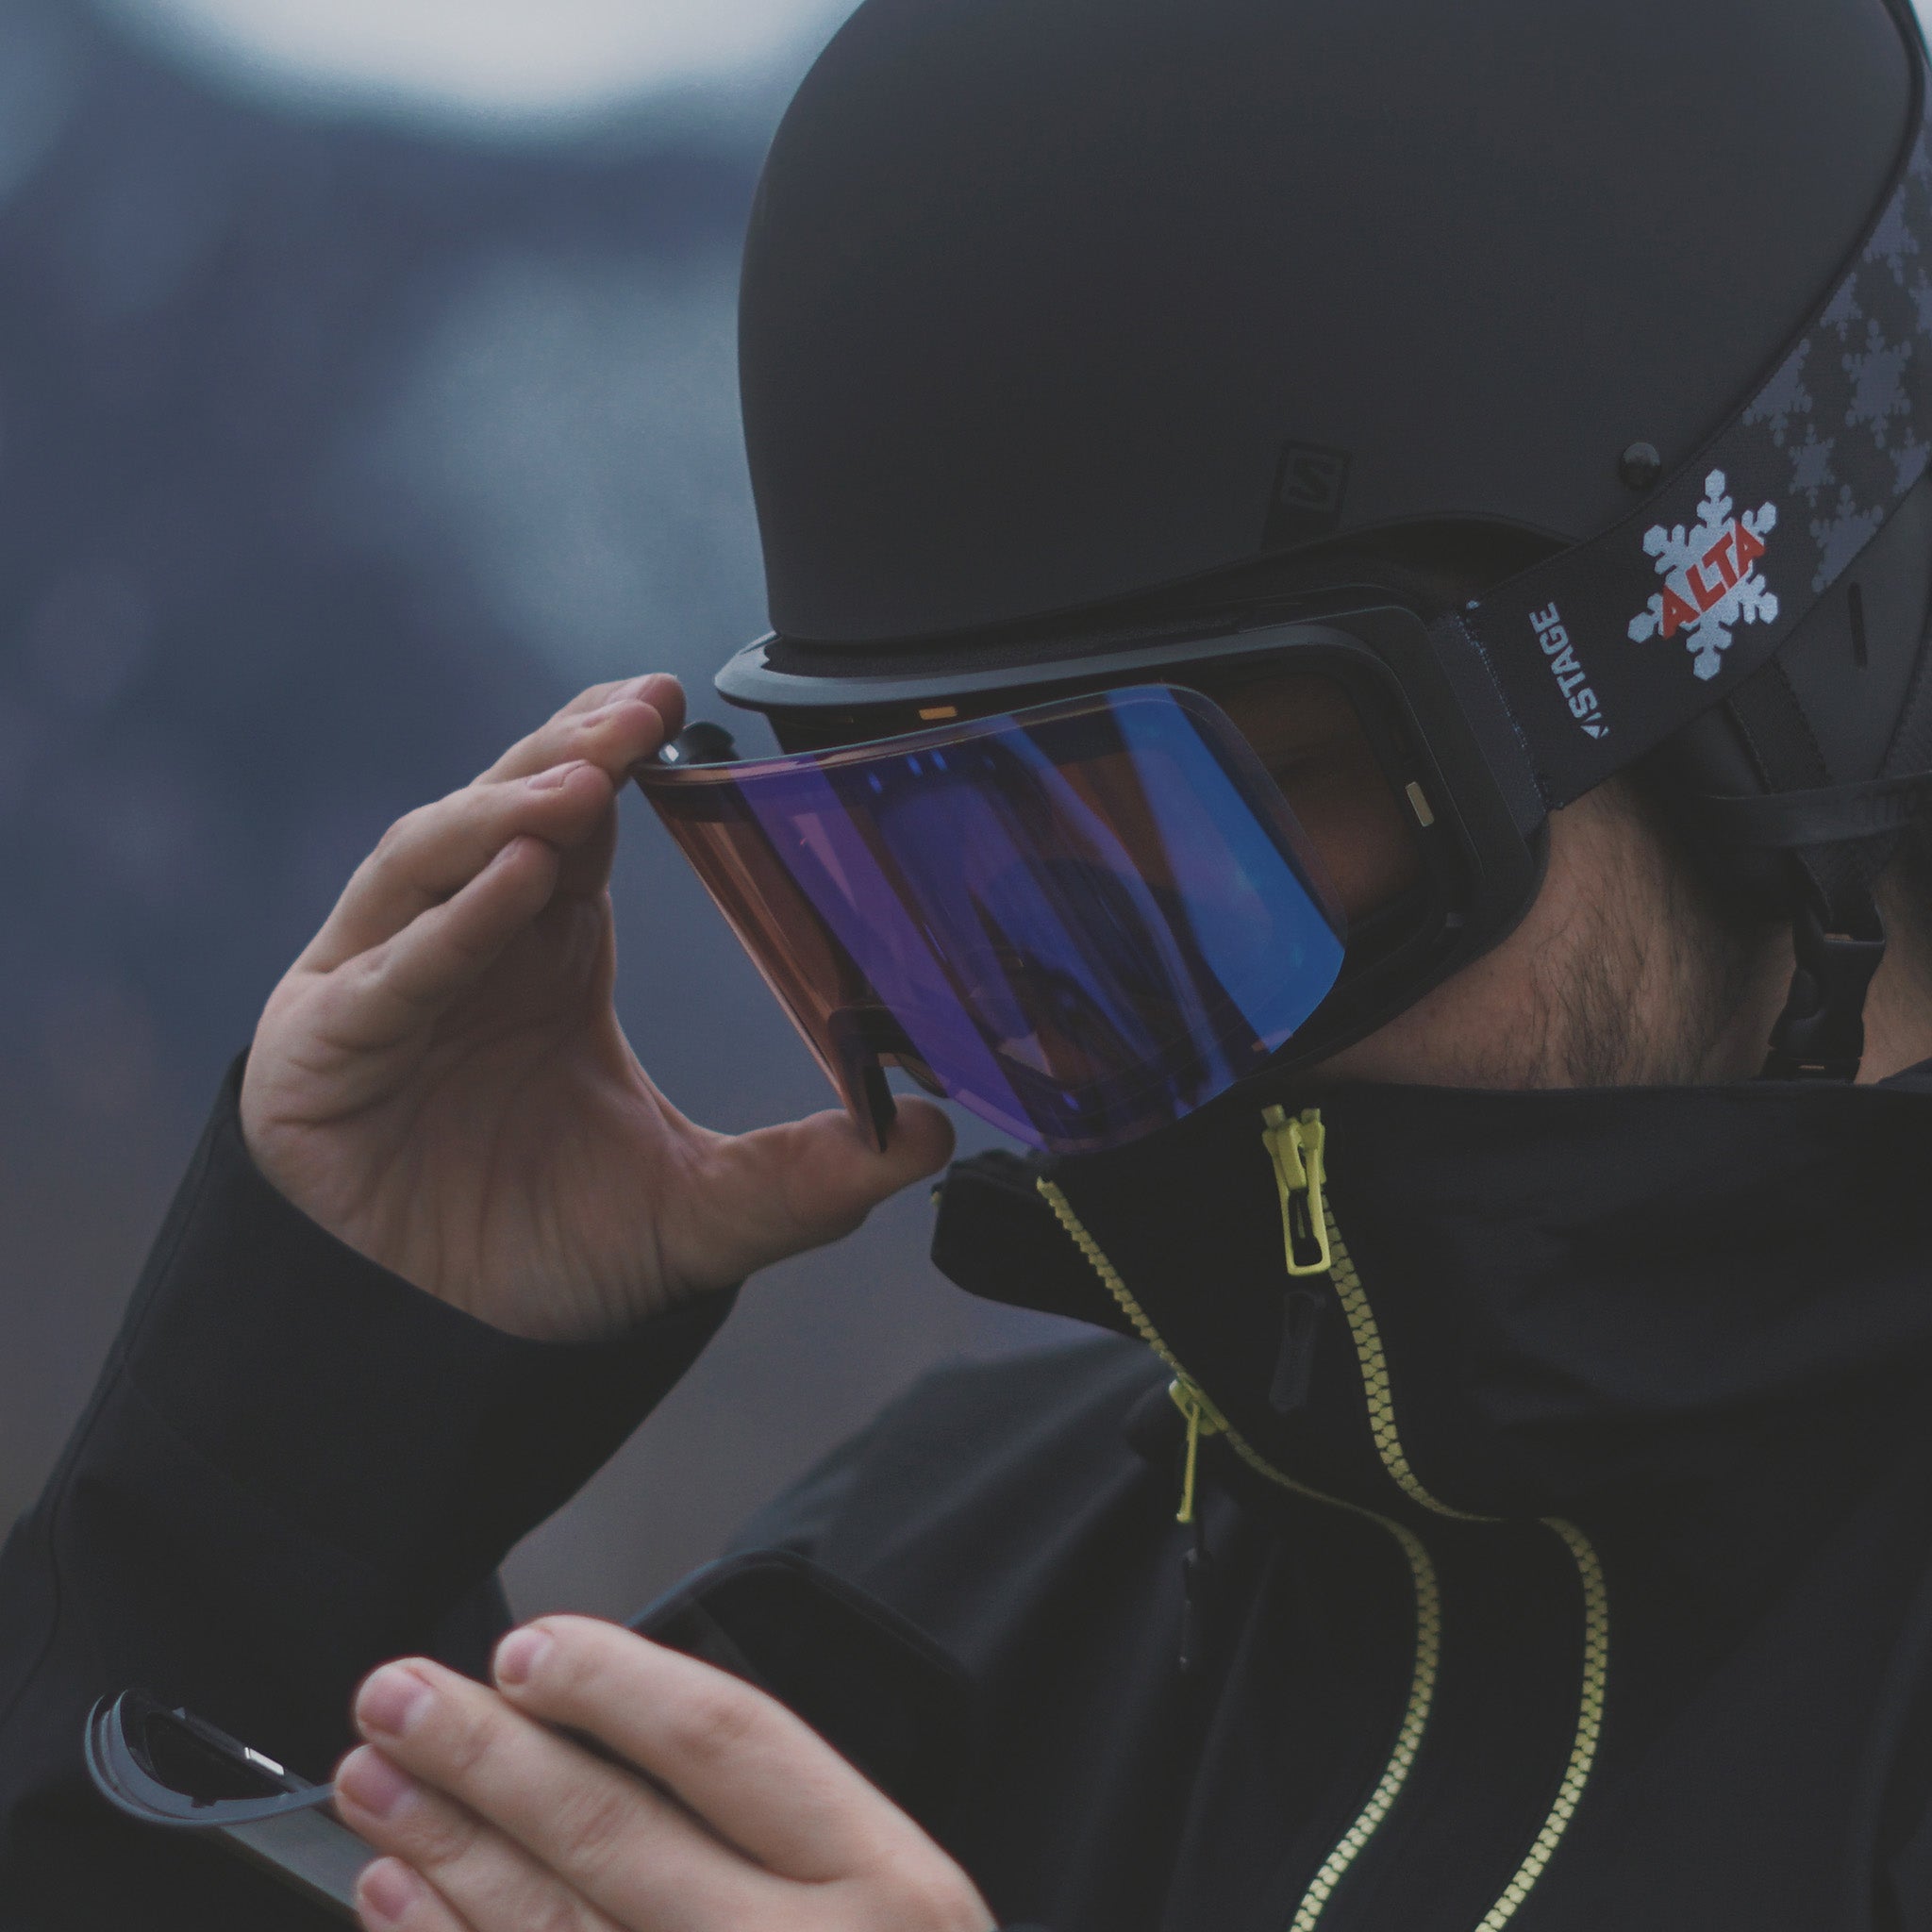 Skier easily swapping lenses on his STAGE Propnetic Magnetic Ski Goggle. The strap featured is the ALTA custom ski goggle strap.